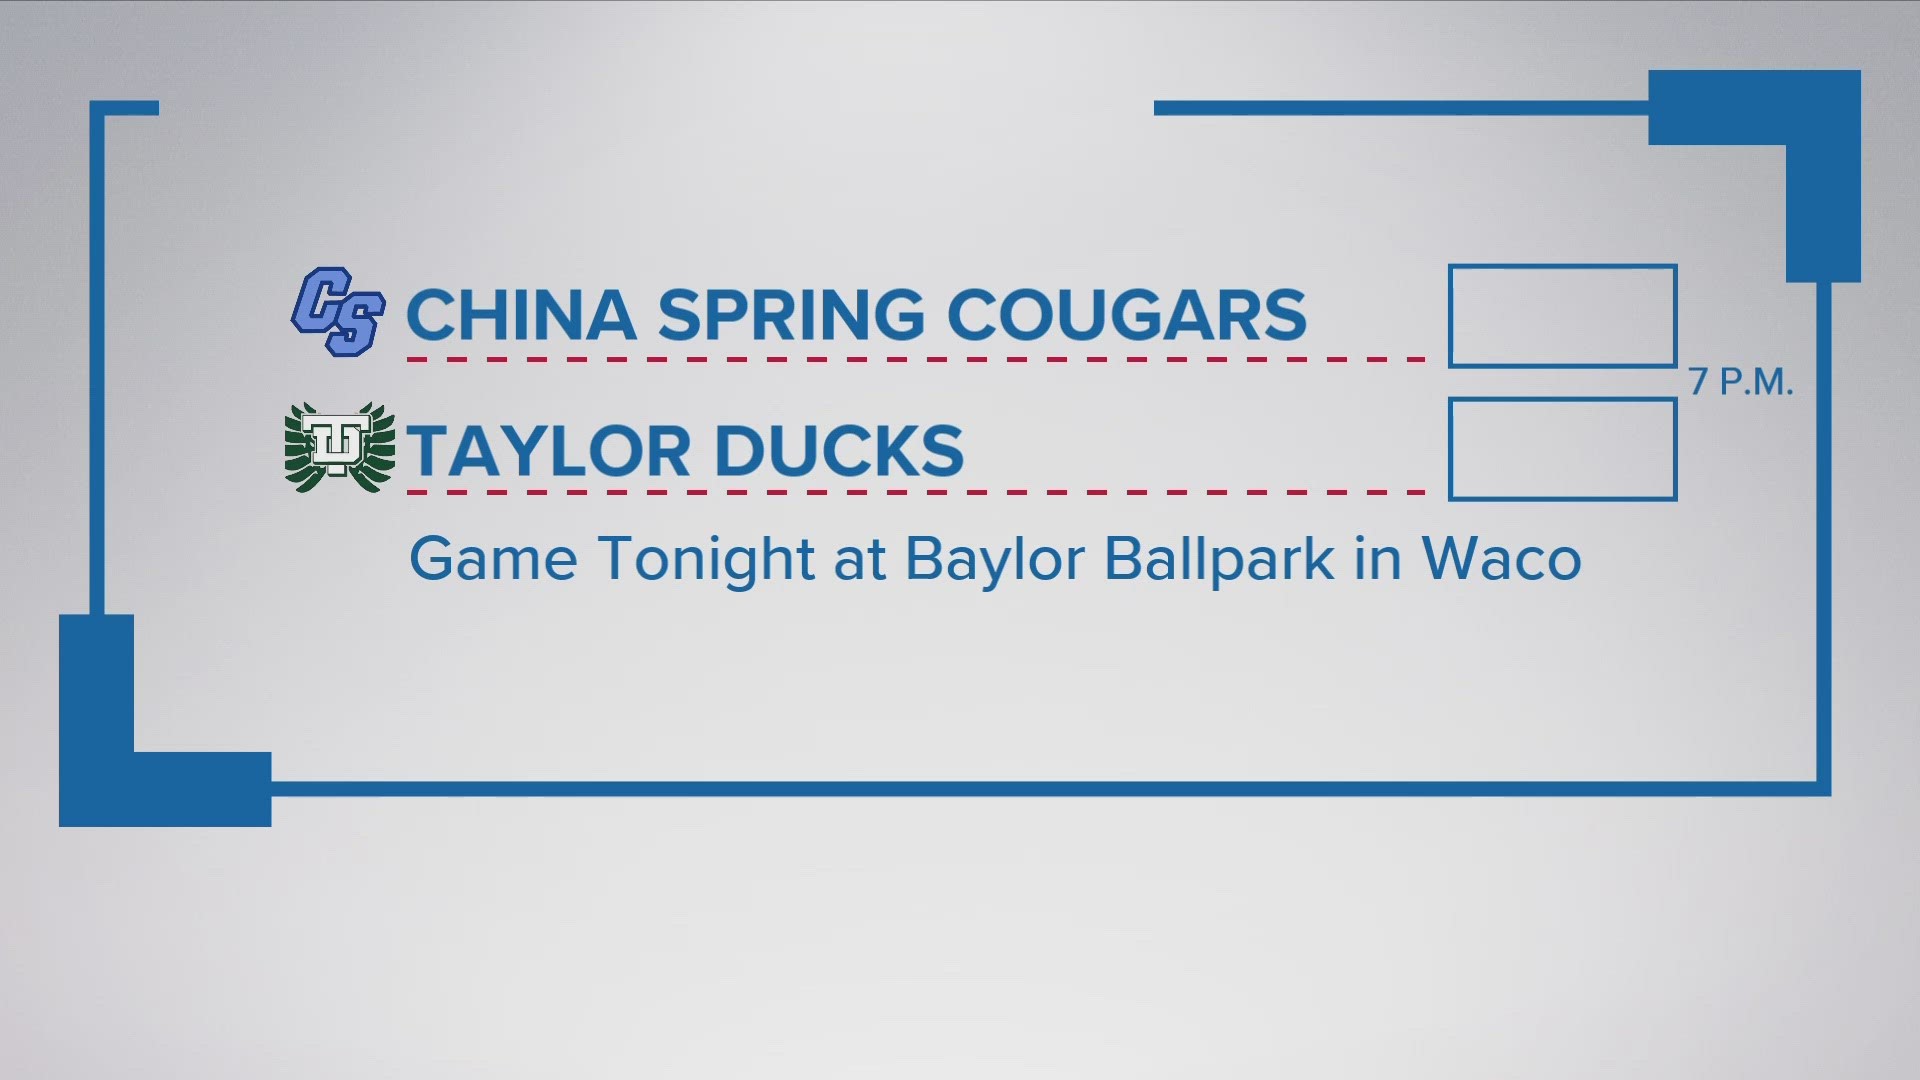 The game starts at 7 p.m. in Waco.